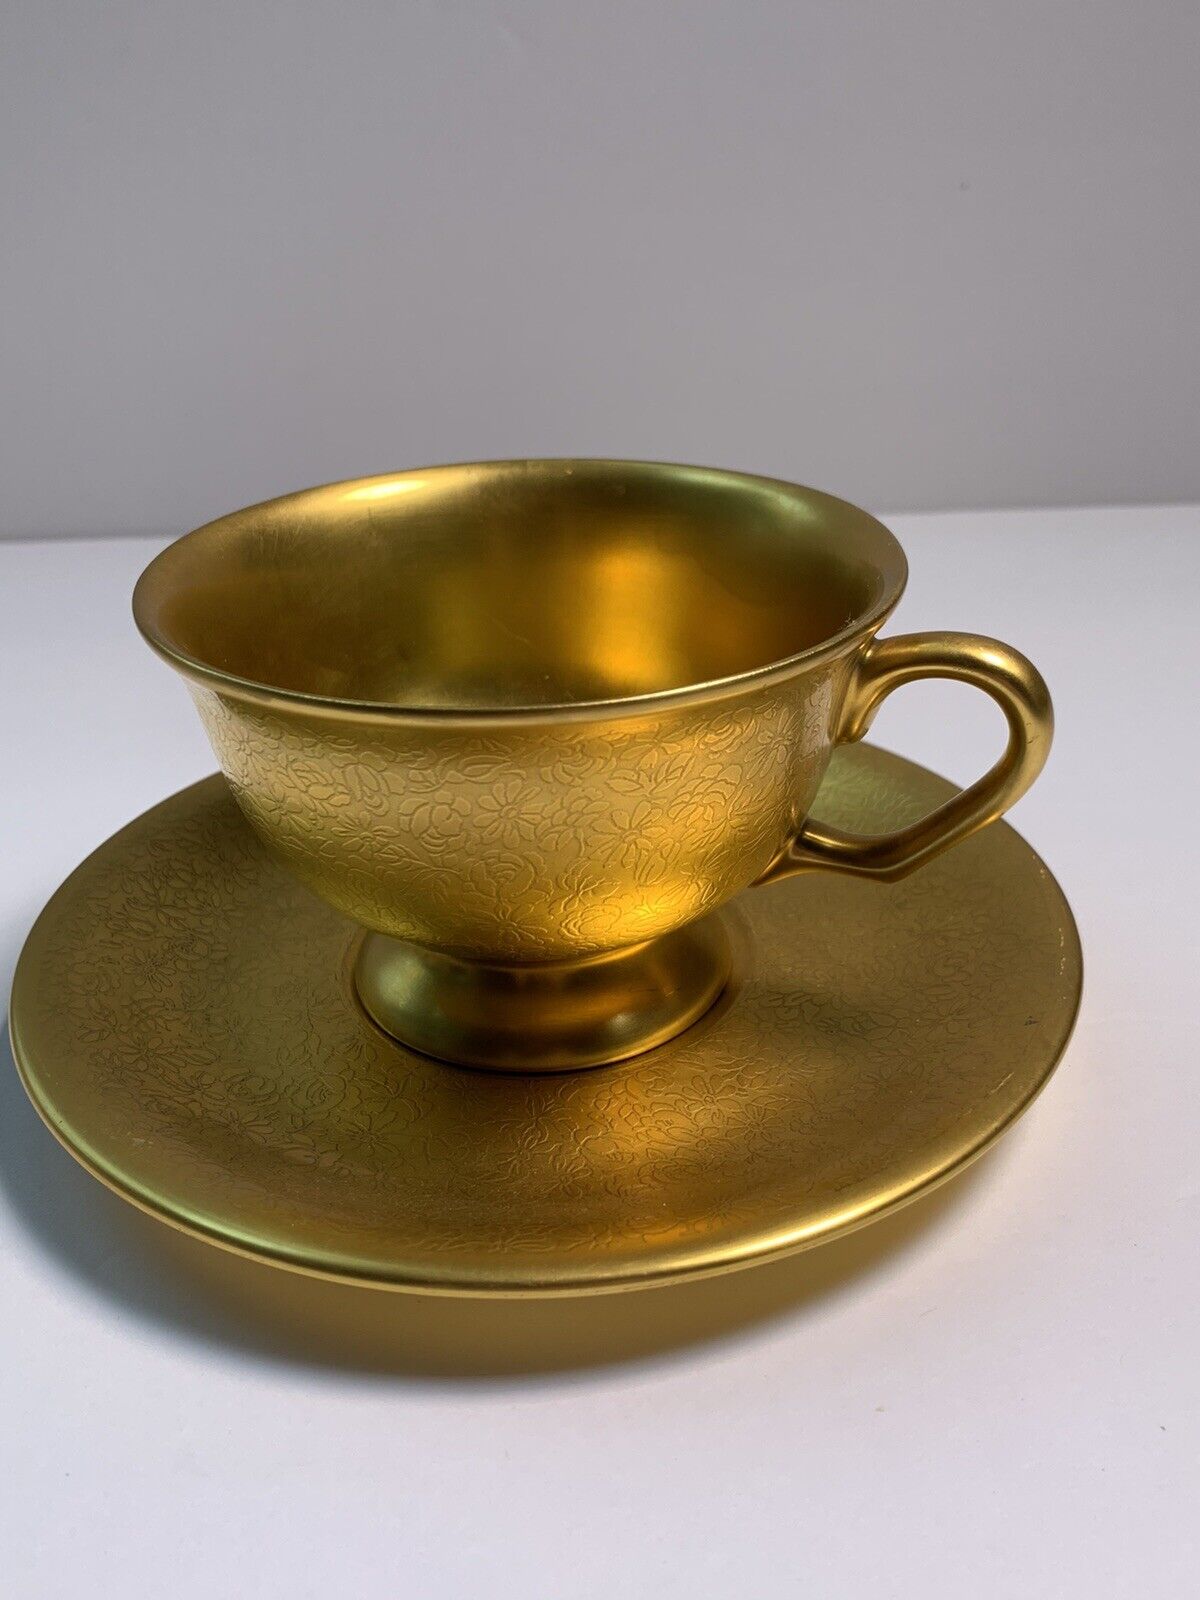 PICKARD USA 689 GOLD COLORED ROSE AND DAISY CUP AND SAUCER GOLD